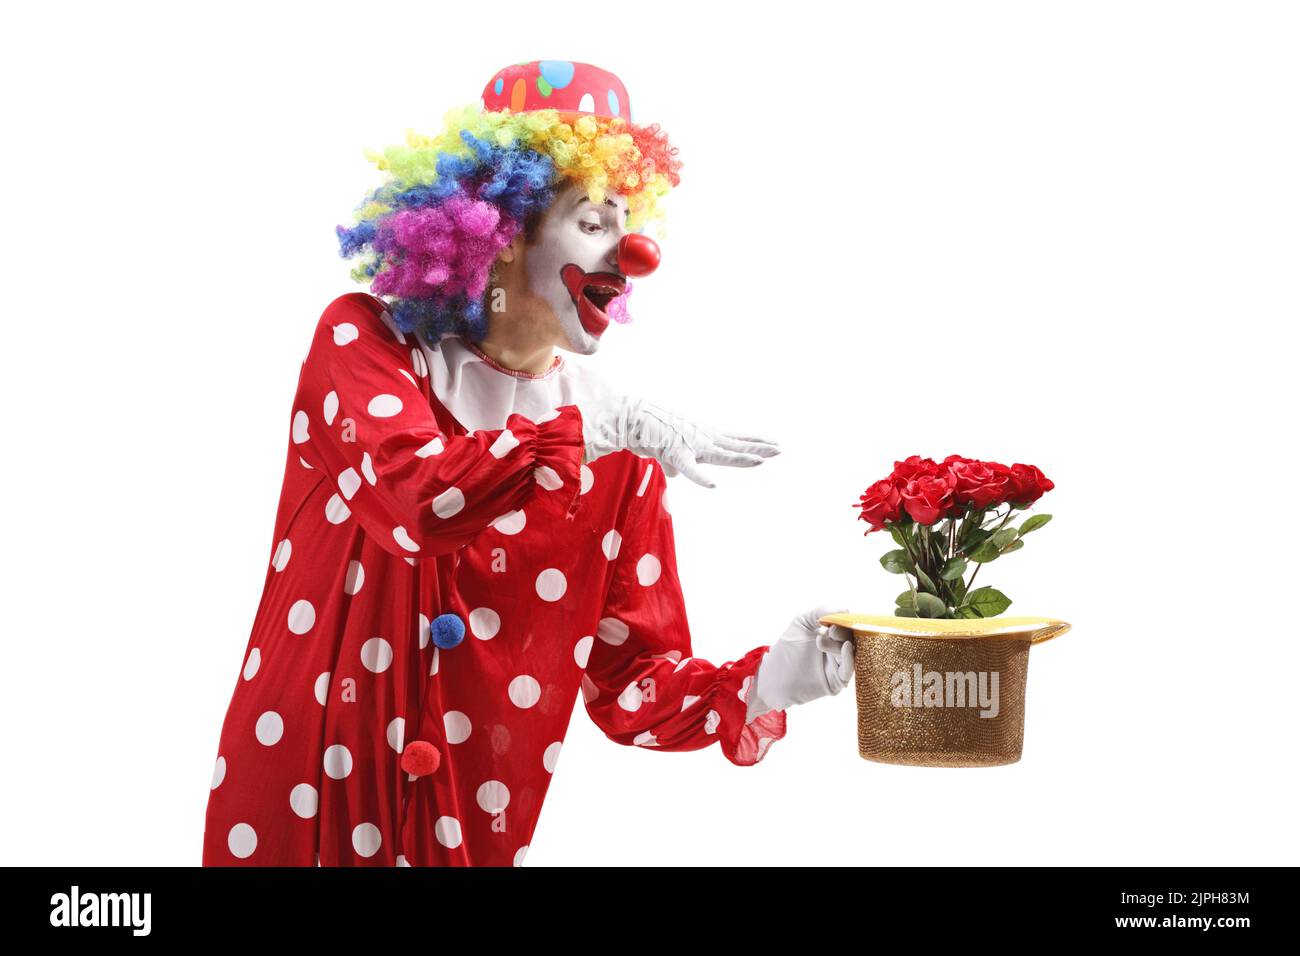 Clown performing a magic trick with a hat and red roses isolated on white background Stock Photo